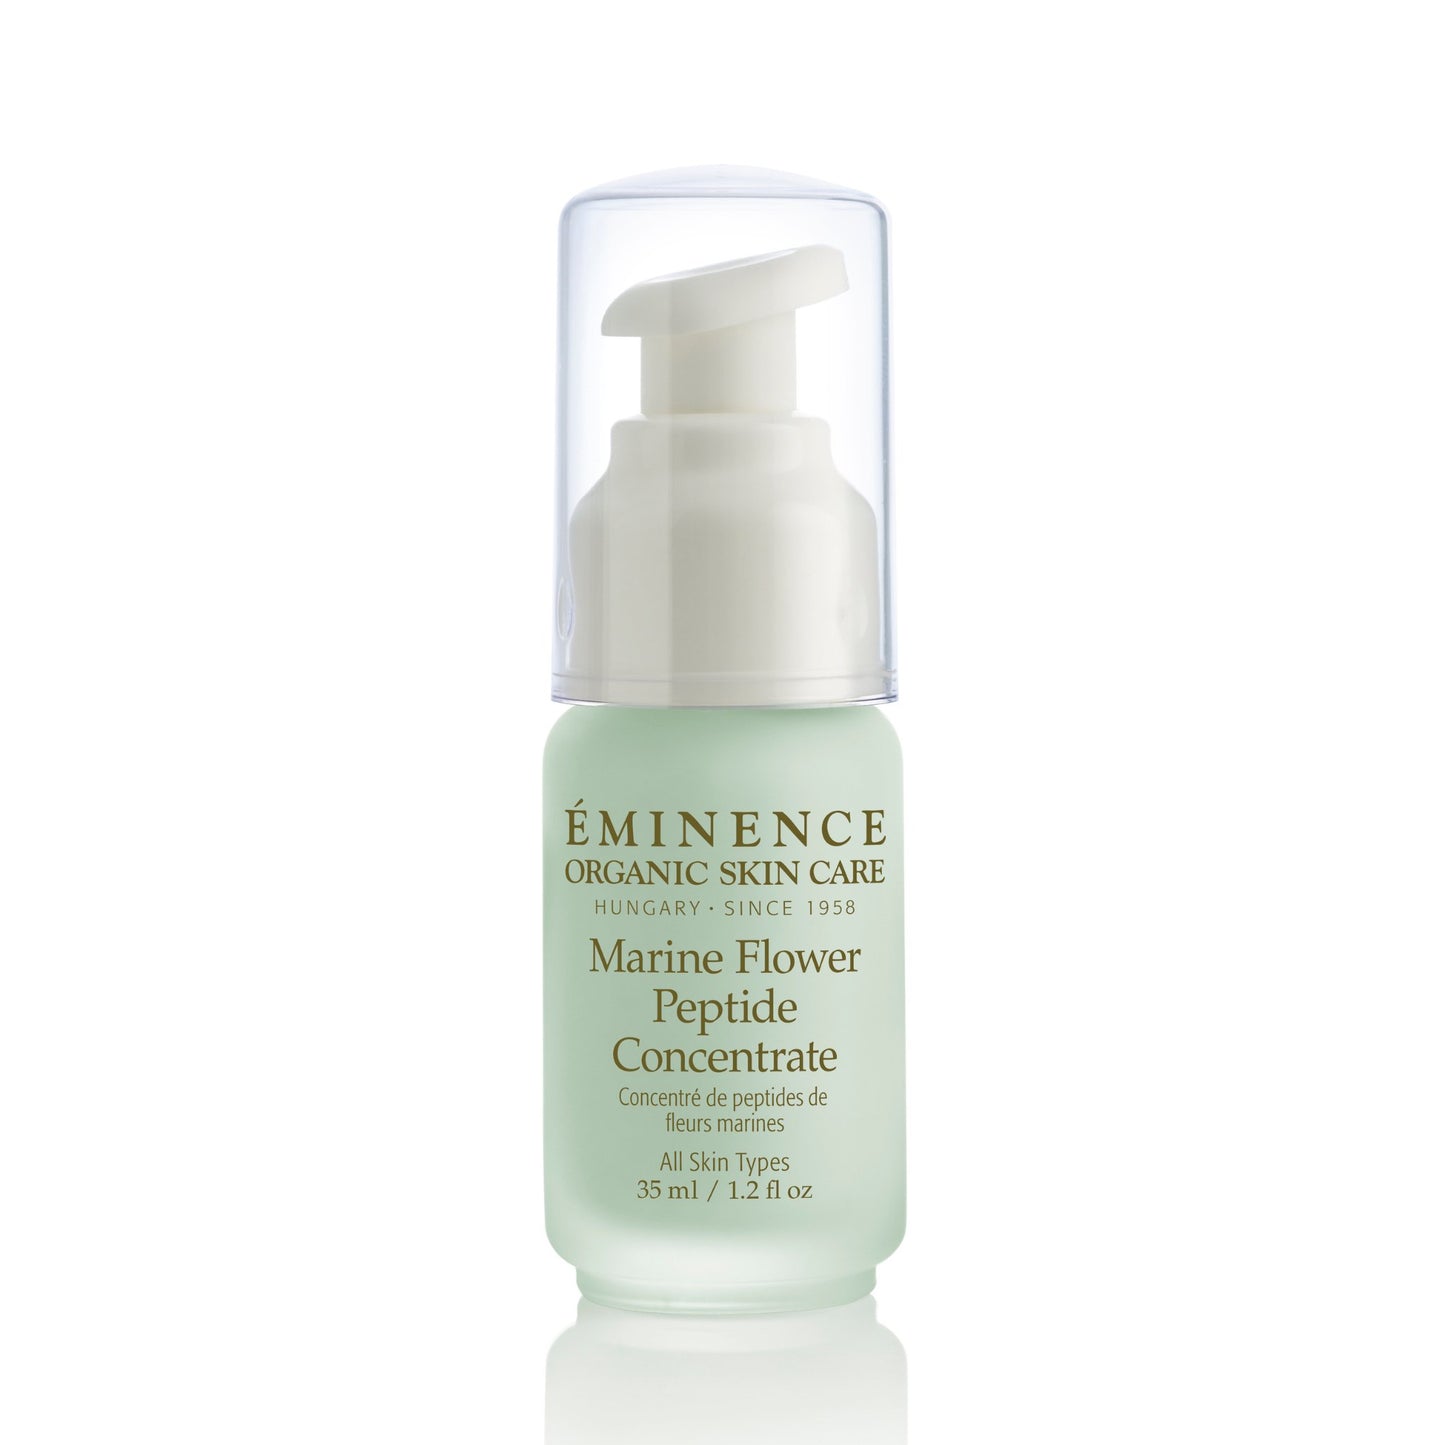 Eminence Organics - Eminence Marine Flower Peptide Concentrate - ORESTA clean beauty simplified